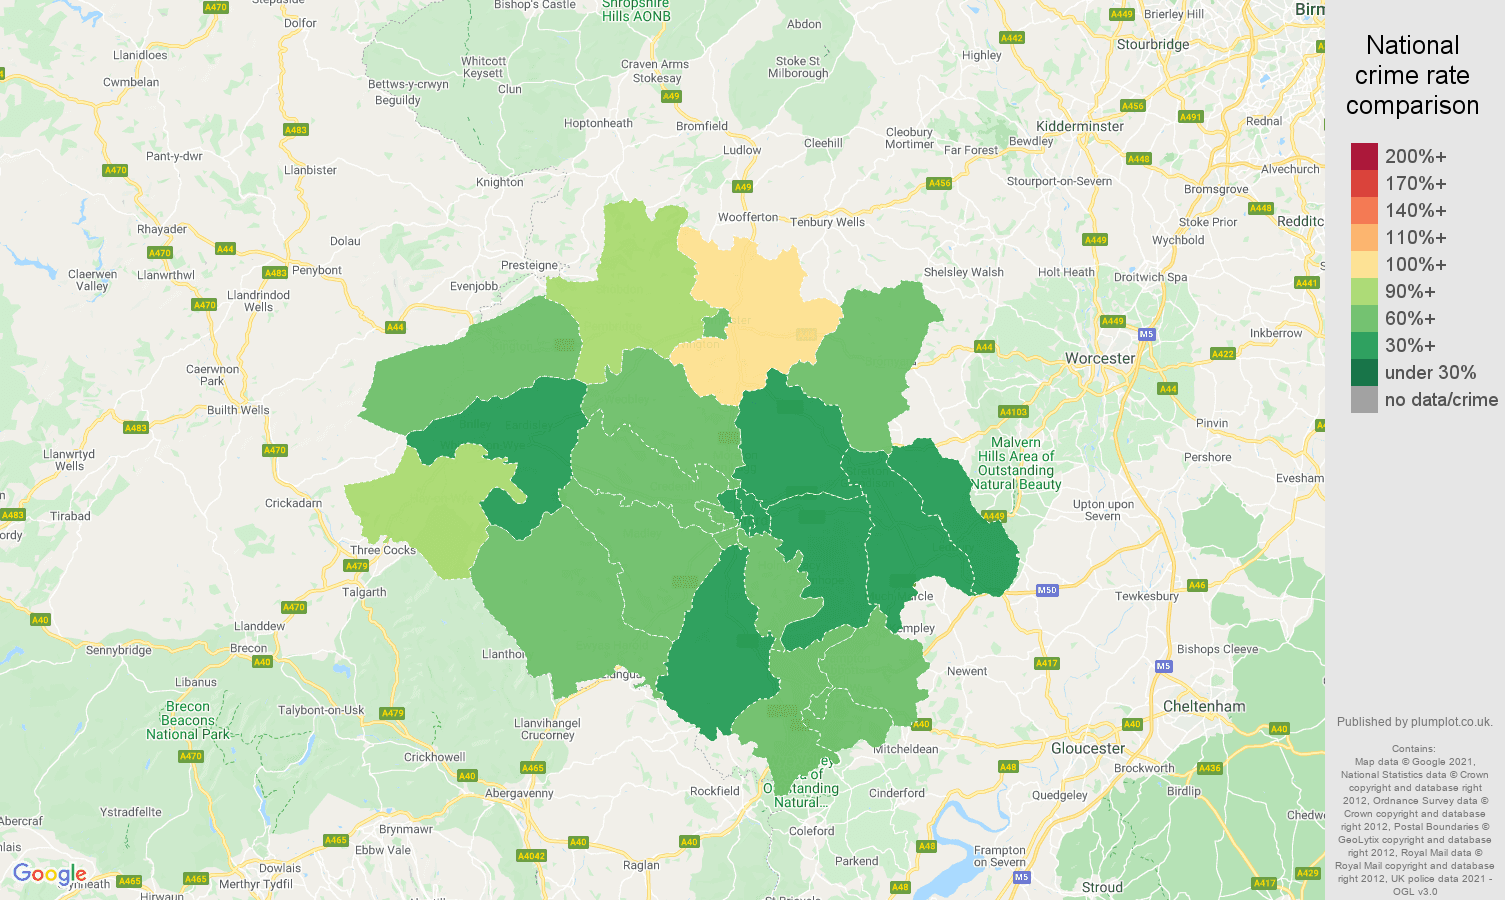 Hereford burglary crime rate comparison map